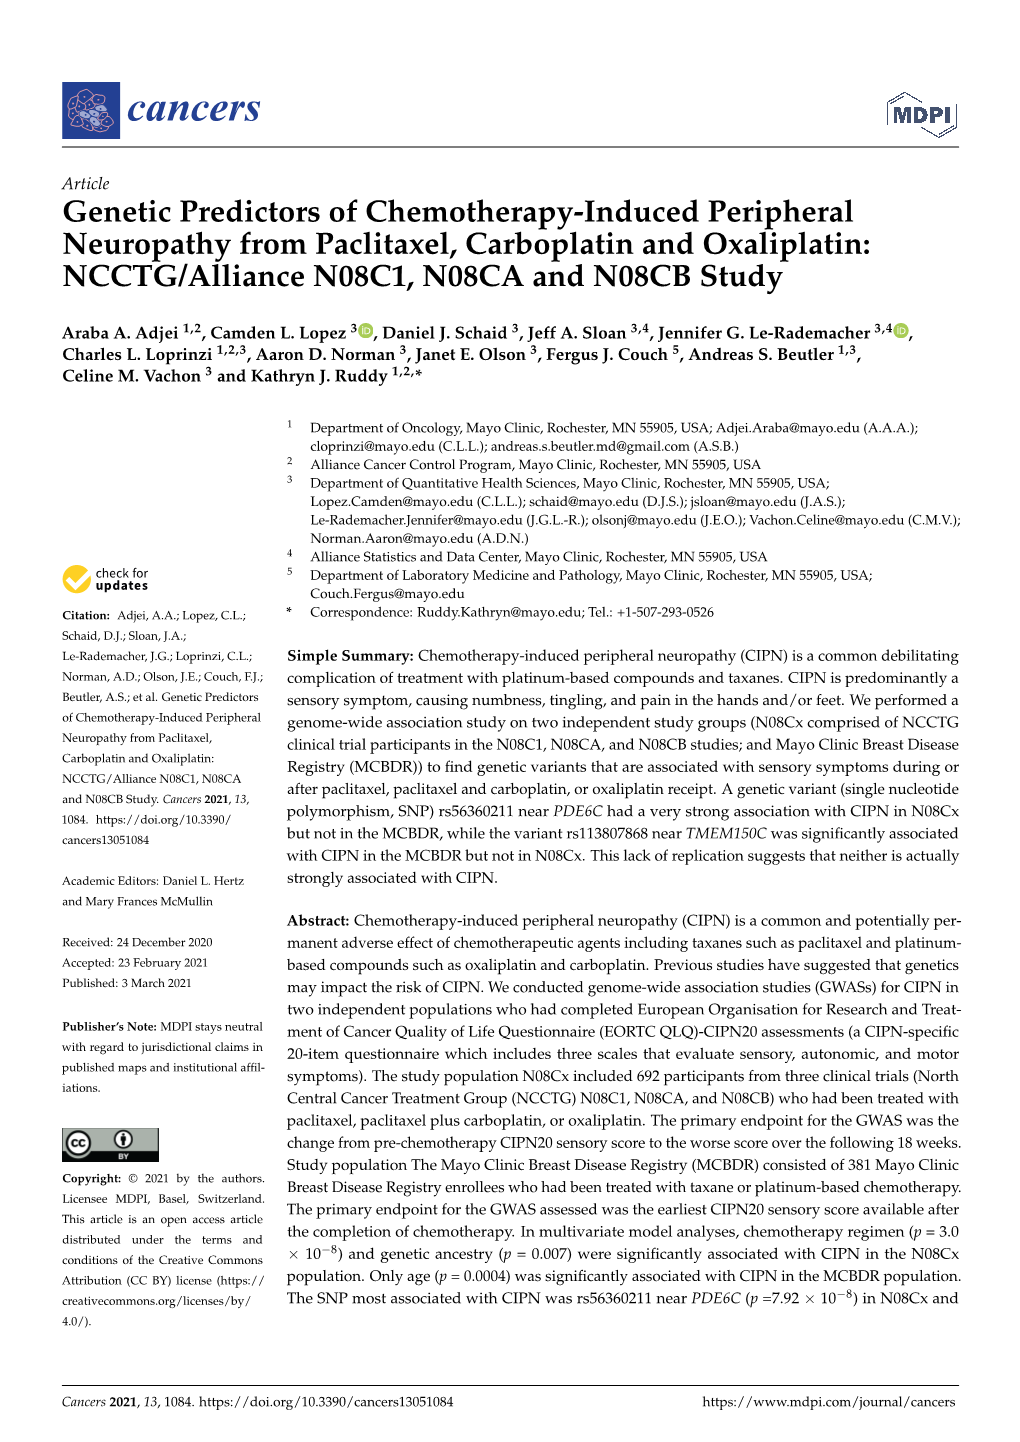 Genetic Predictors of Chemotherapy-Induced Peripheral Neuropathy from Paclitaxel, Carboplatin and Oxaliplatin: NCCTG/Alliance N08C1, N08CA and N08CB Study